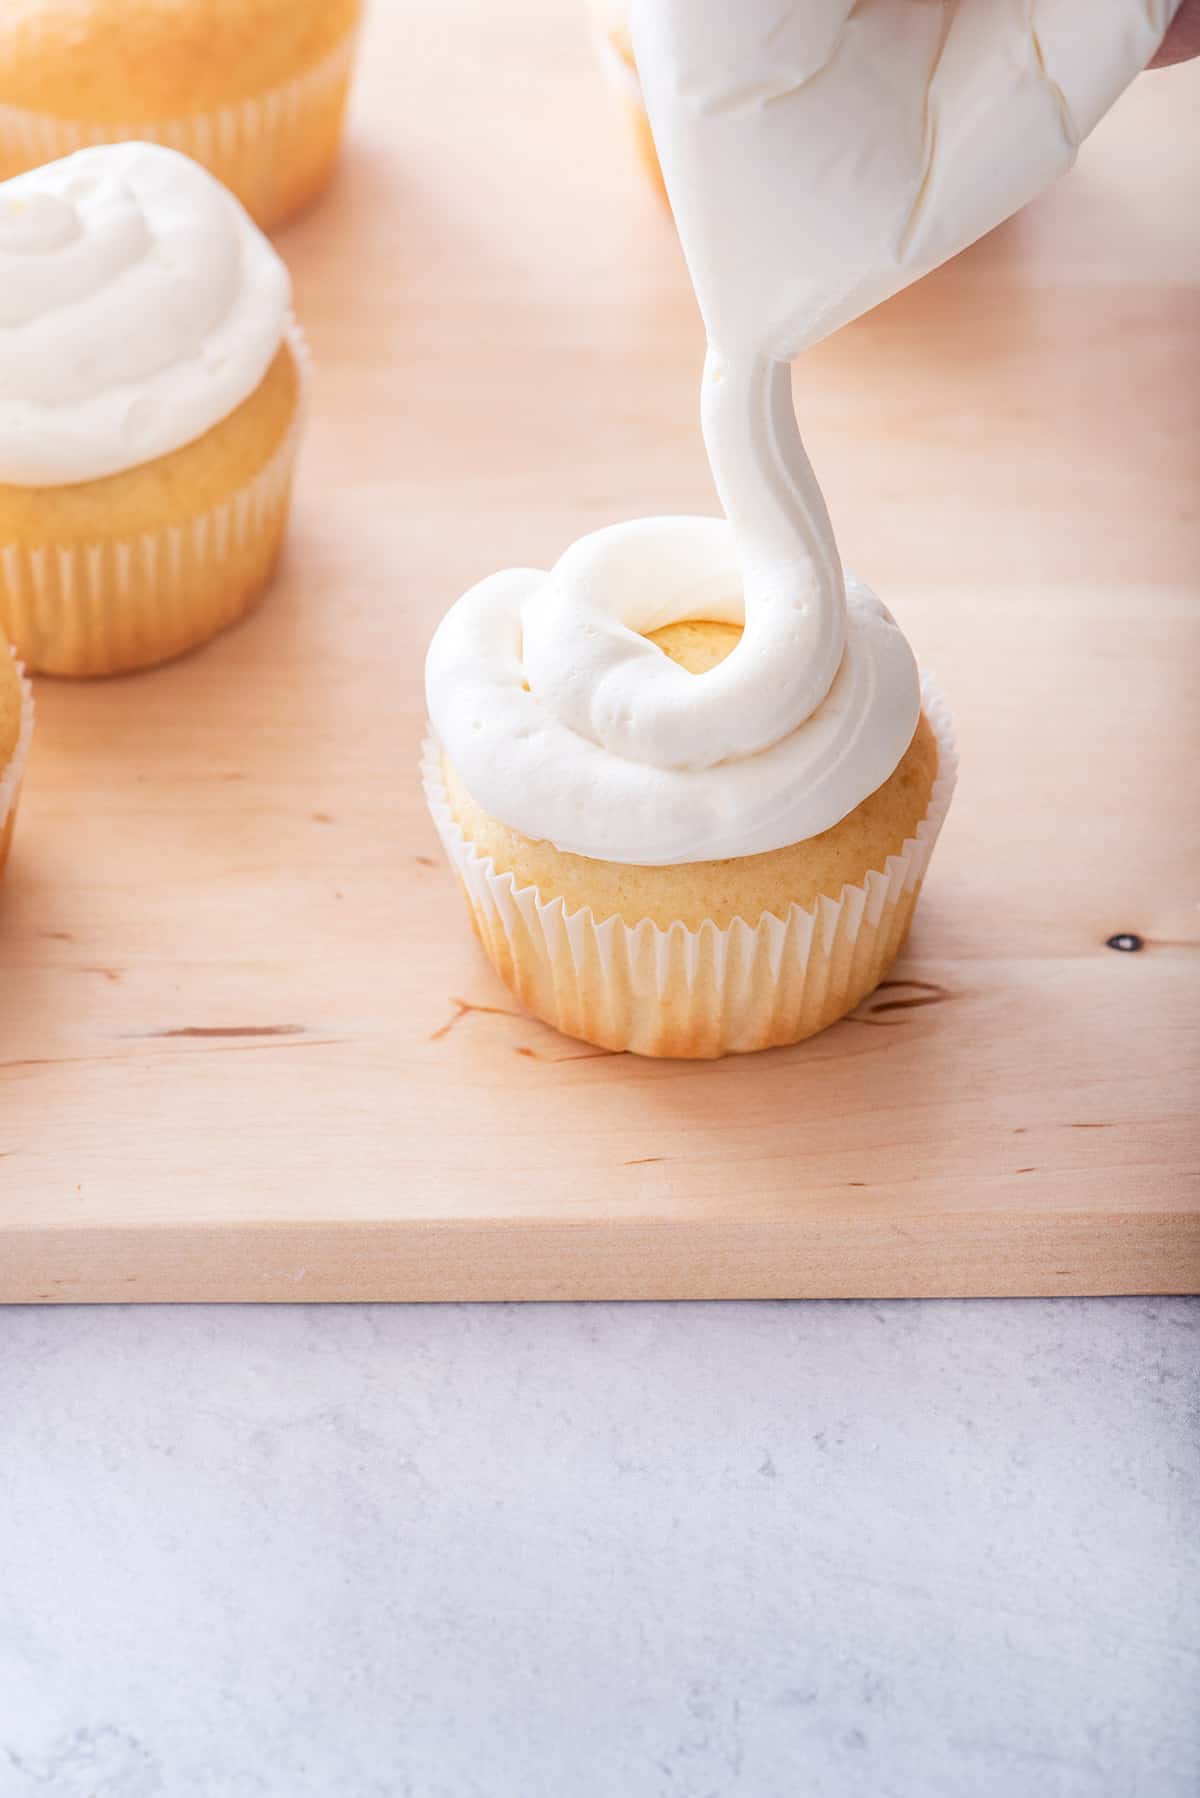 Piping cupcakes with cream cheese frosting to from ziplock bag